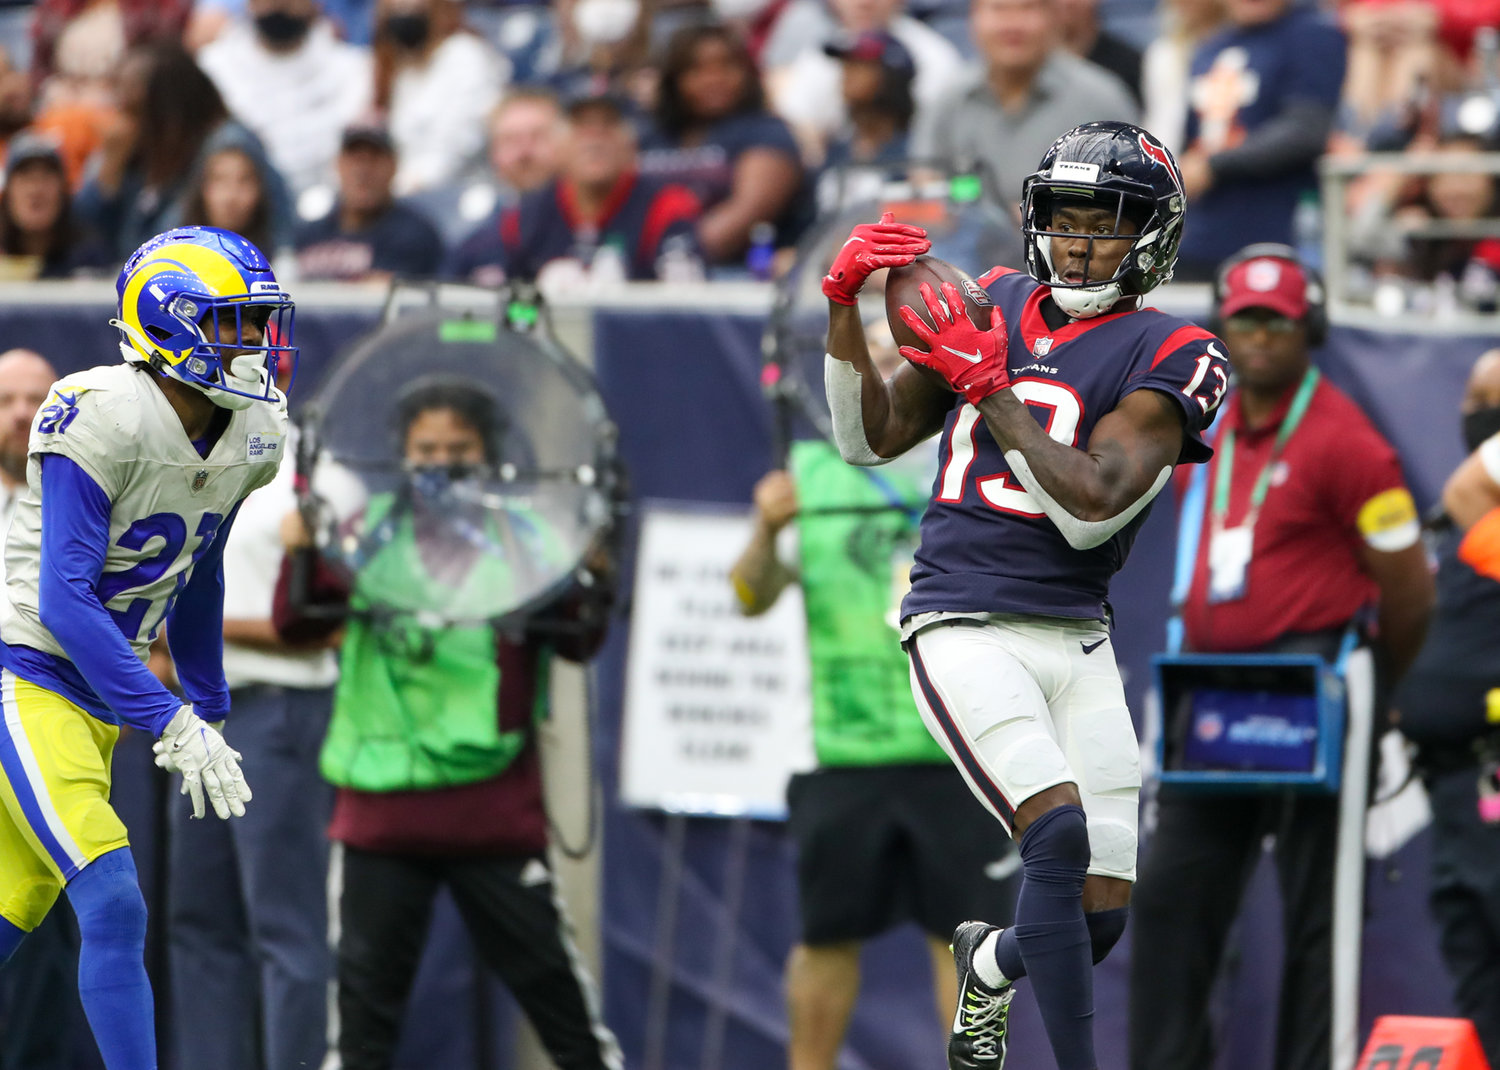 Houston Texans wide receiver Brandin Cooks (13) brings in a catch on a 45-yard scoring play during an NFL game between Houston and the Los Angeles Rams on October 31, 2021 in Houston, Texas.